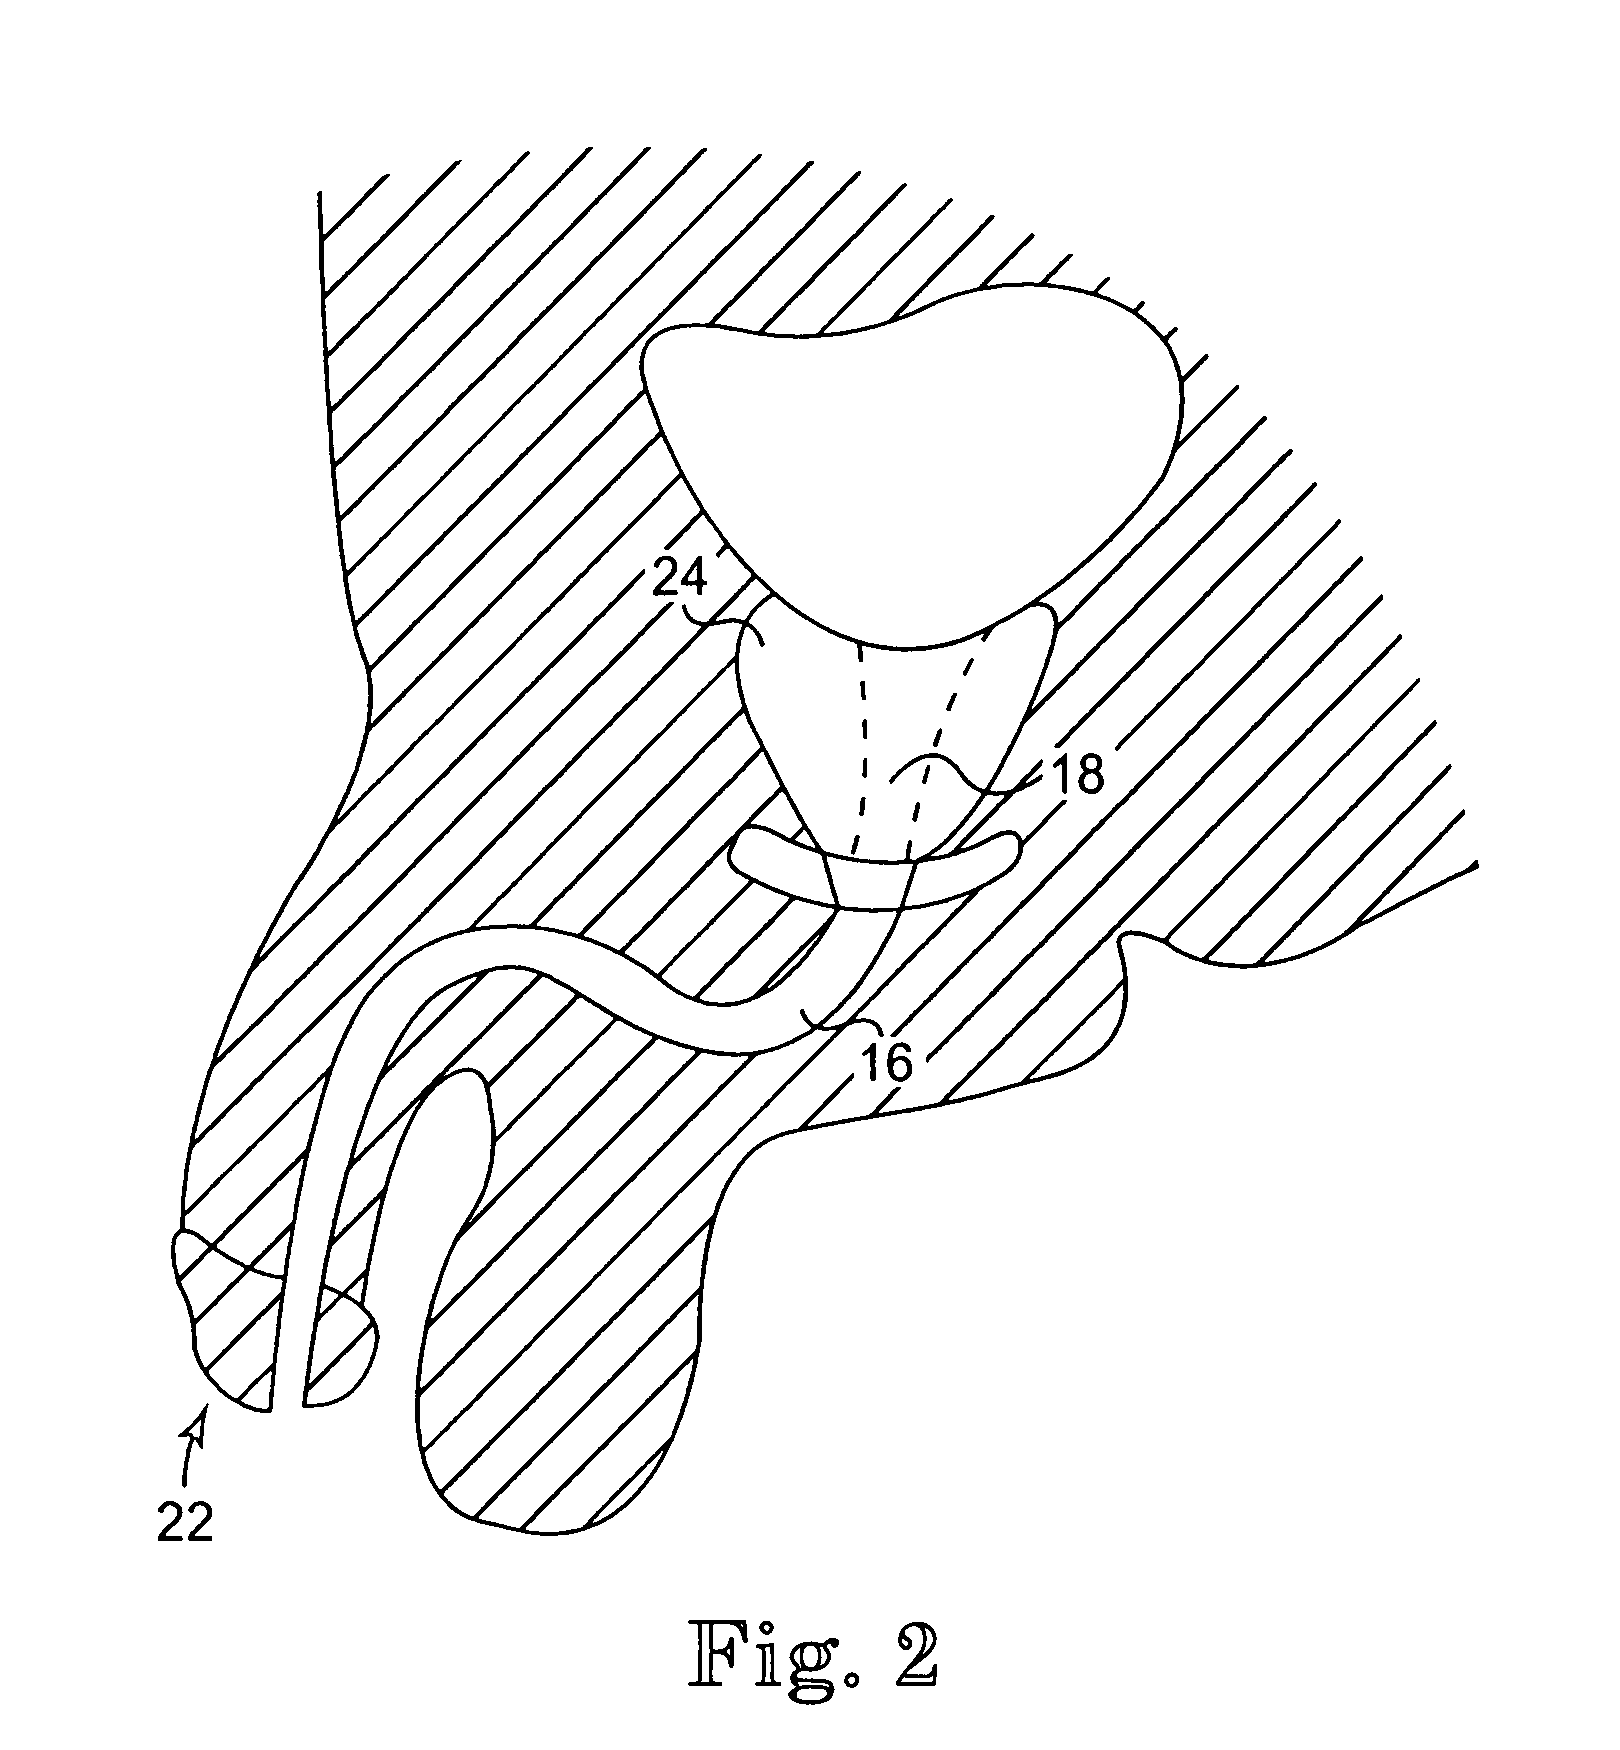 Floating Sling for Treatment of Incontinence